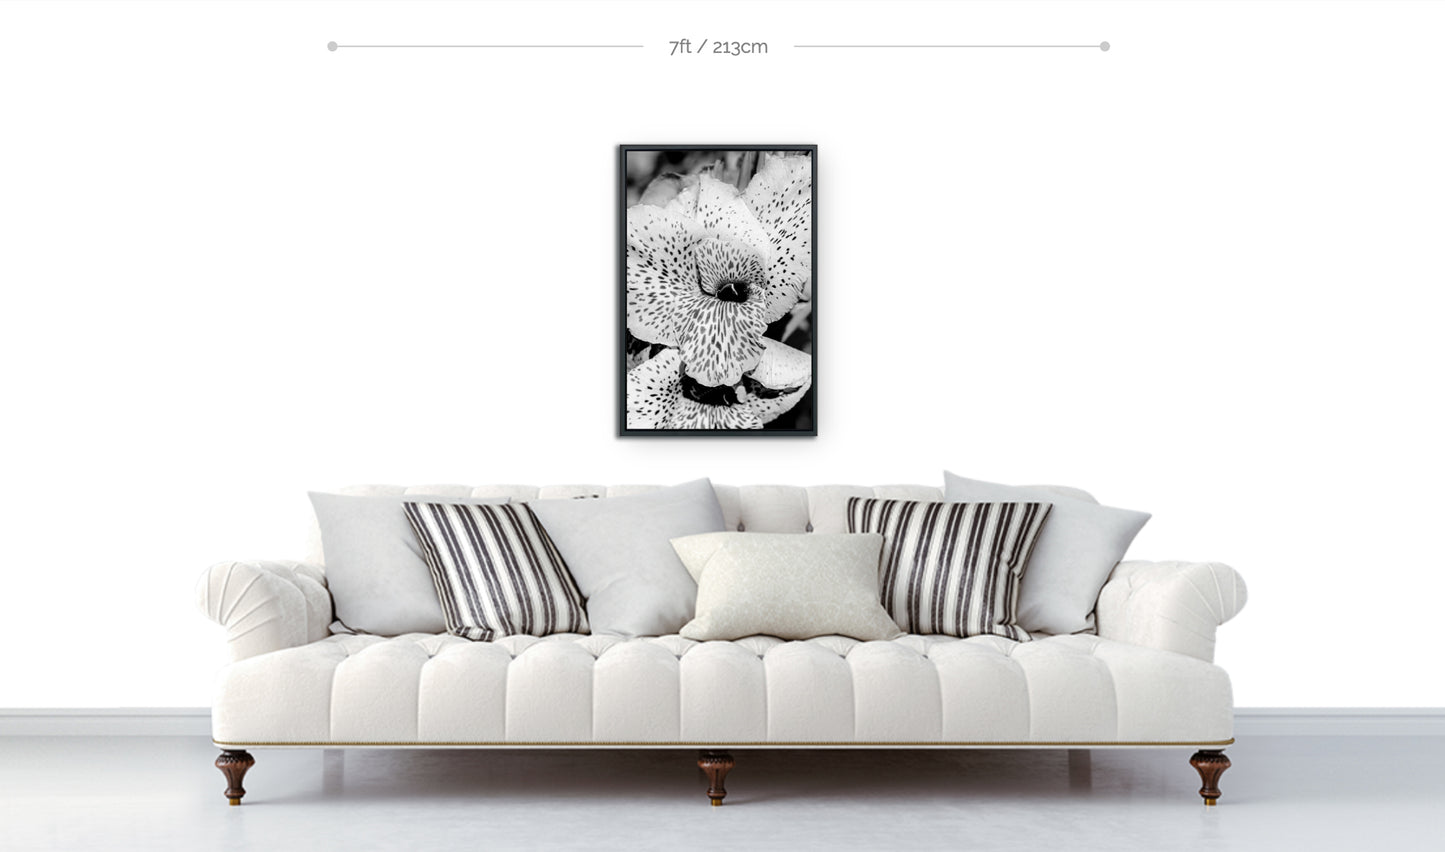 Flower wall decor example 30x20 framed flower print black and white closeup of spotted lily hanging above sofa